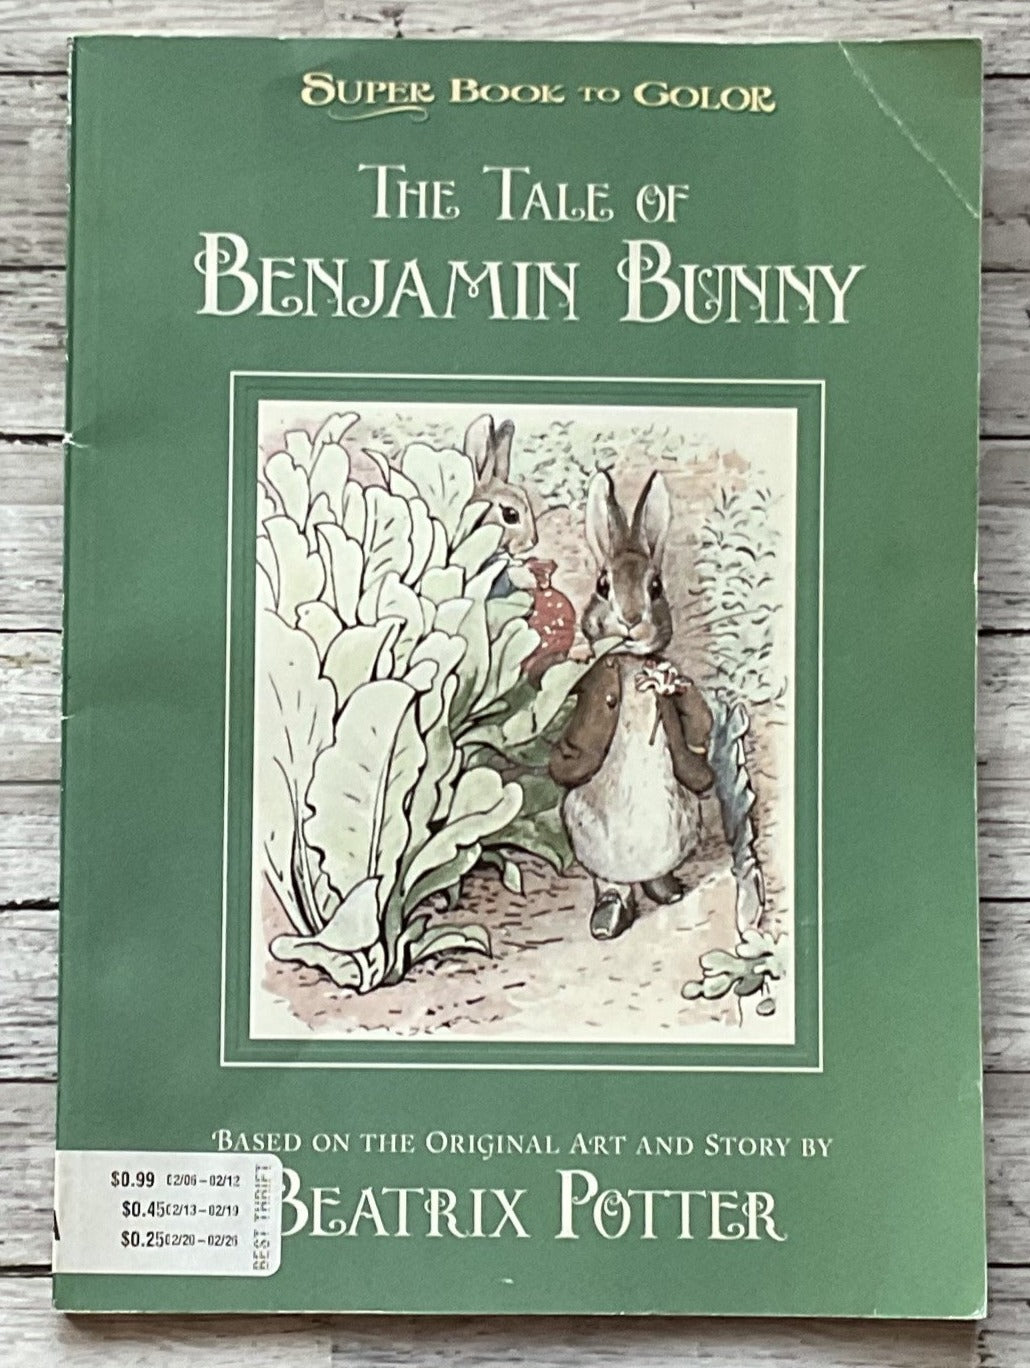 Super Book to Color The Tale of Benjamin Bunny